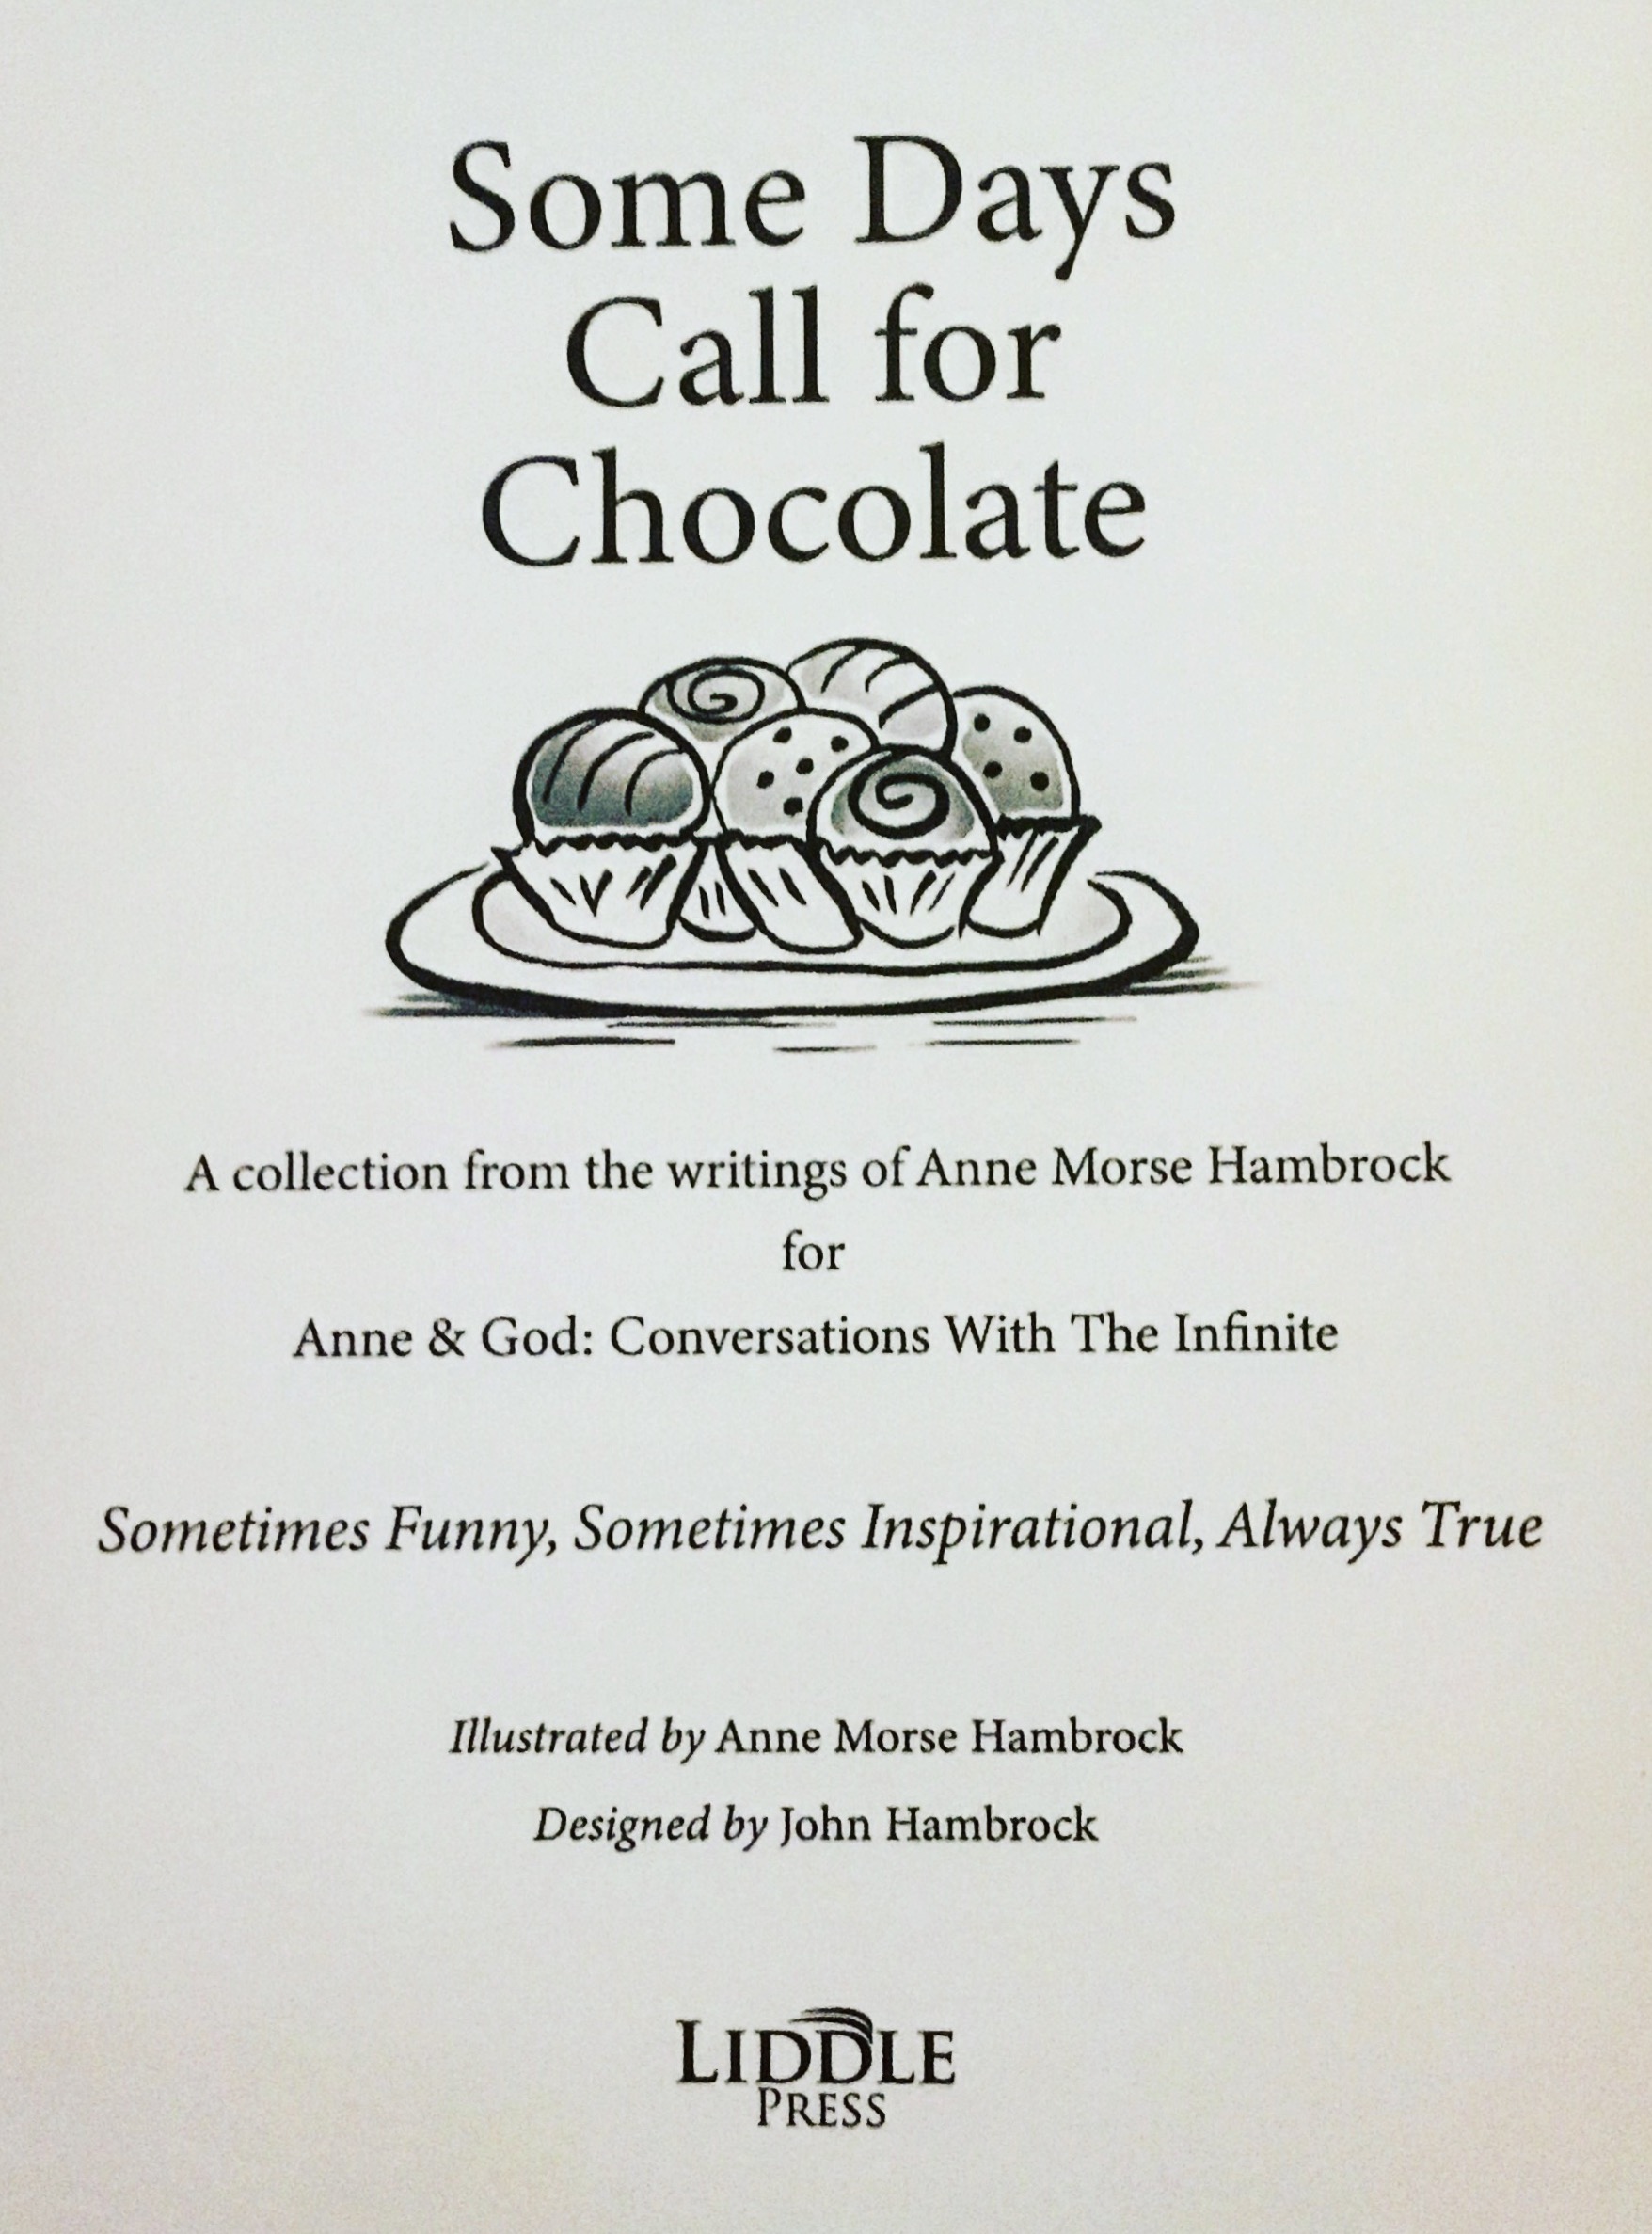 Some Days Call for Chocolate Title Page For Store